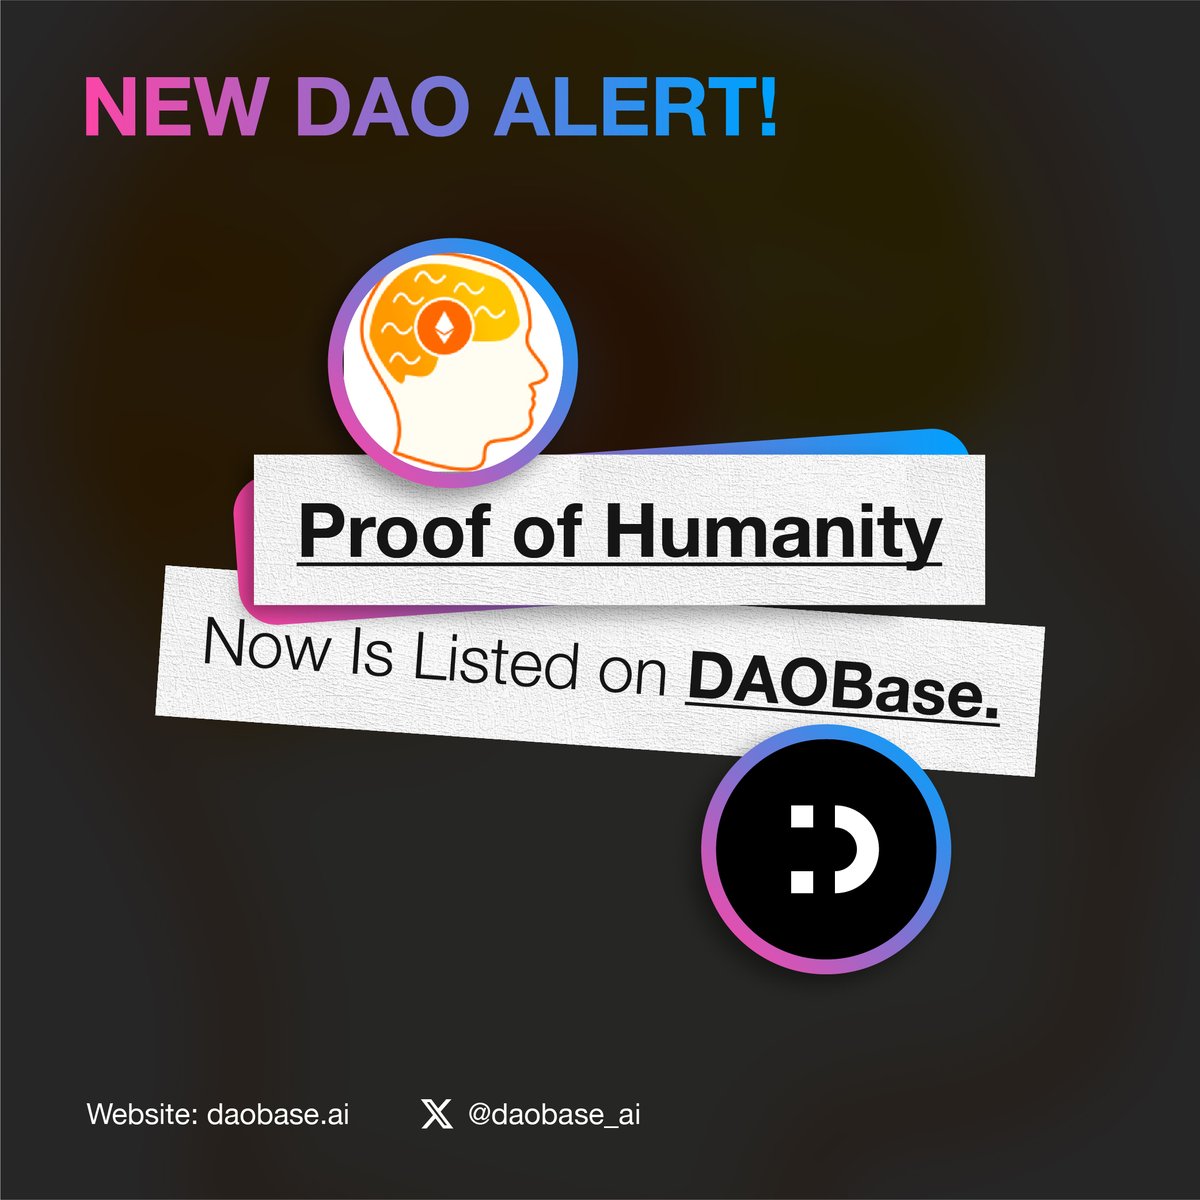 𝗡𝗲𝘄 𝗗𝗔𝗢 𝗔𝗹𝗲𝗿𝘁 🚀

@ProofofHumanity is now listed and verified on DAOBase ✅

By using webs of trust and dispute resolution, Proof of Humanity, built with @Kleros_io, is a list of unique humans that can be leveraged for fair airdrops, social recovery, anti-spam tools,…